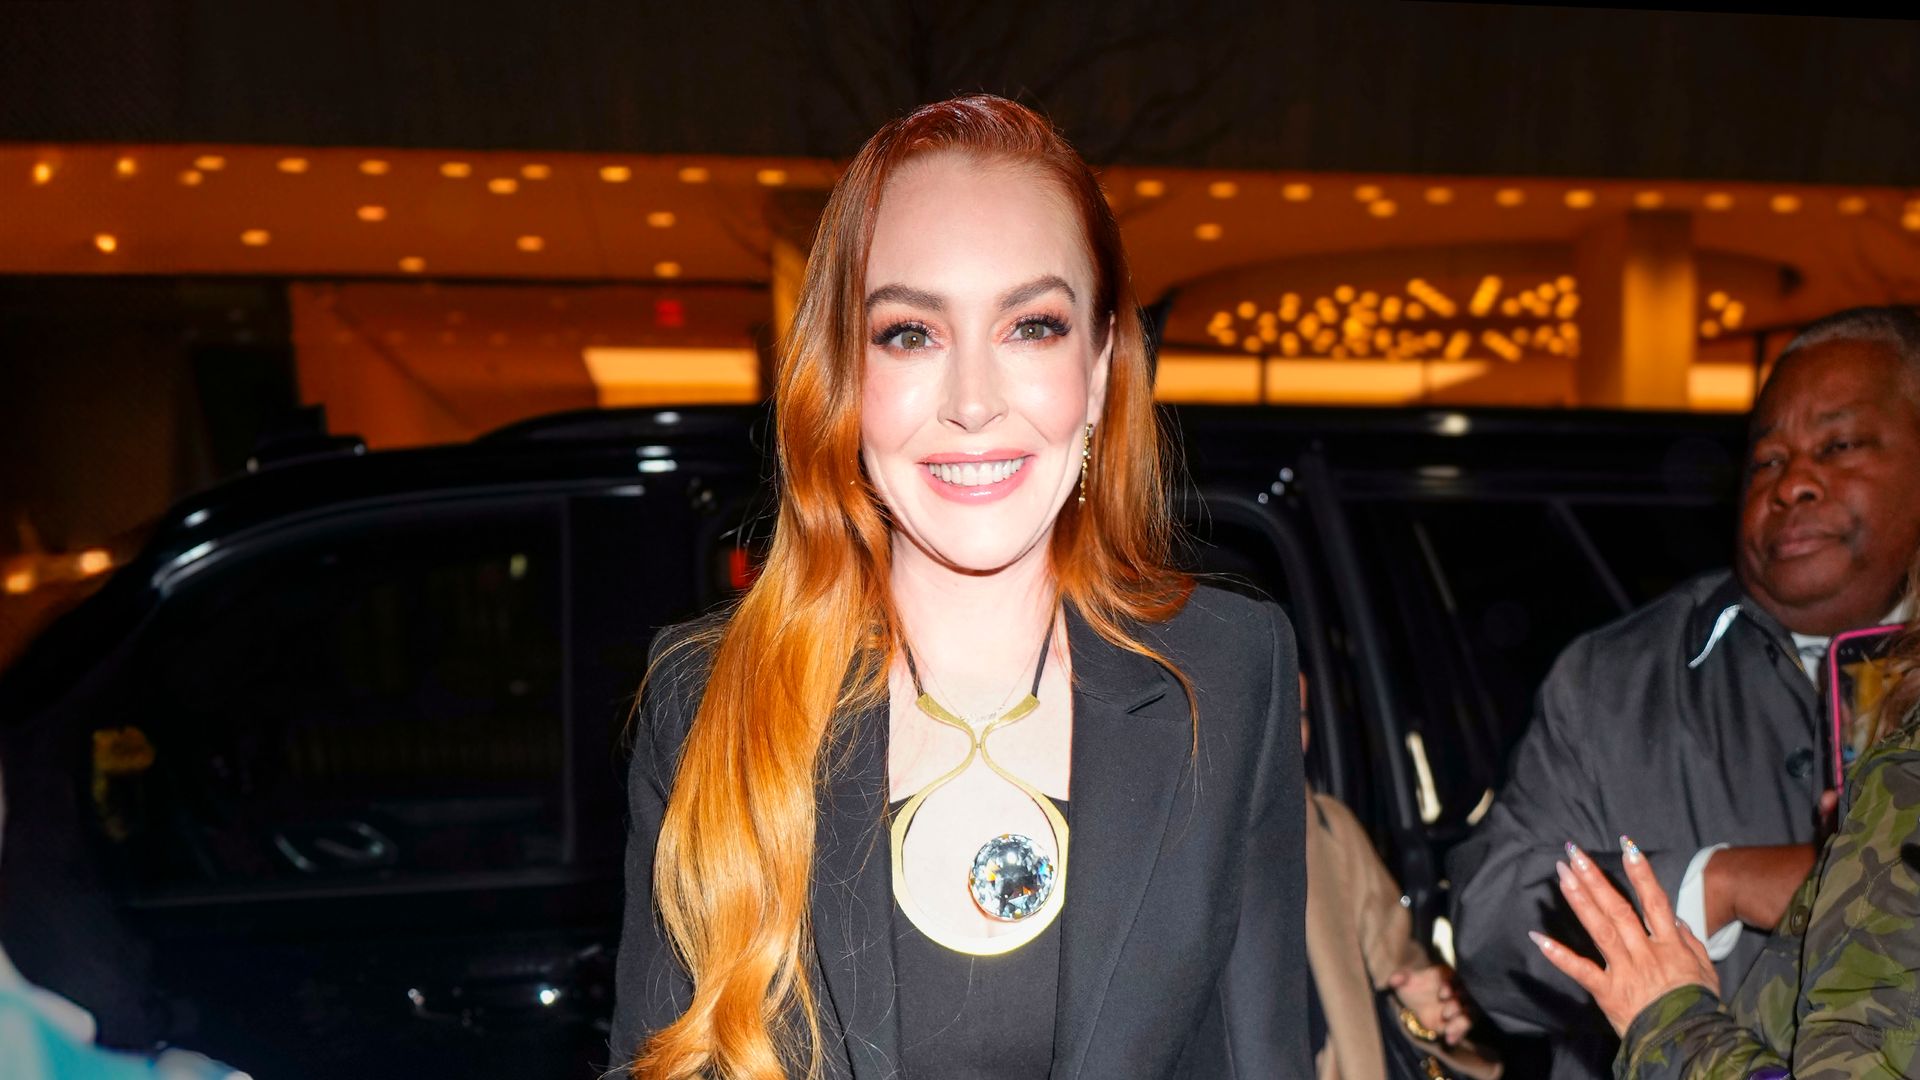 Lindsay Lohan commands attention in chic pantsuit seven months after giving birth